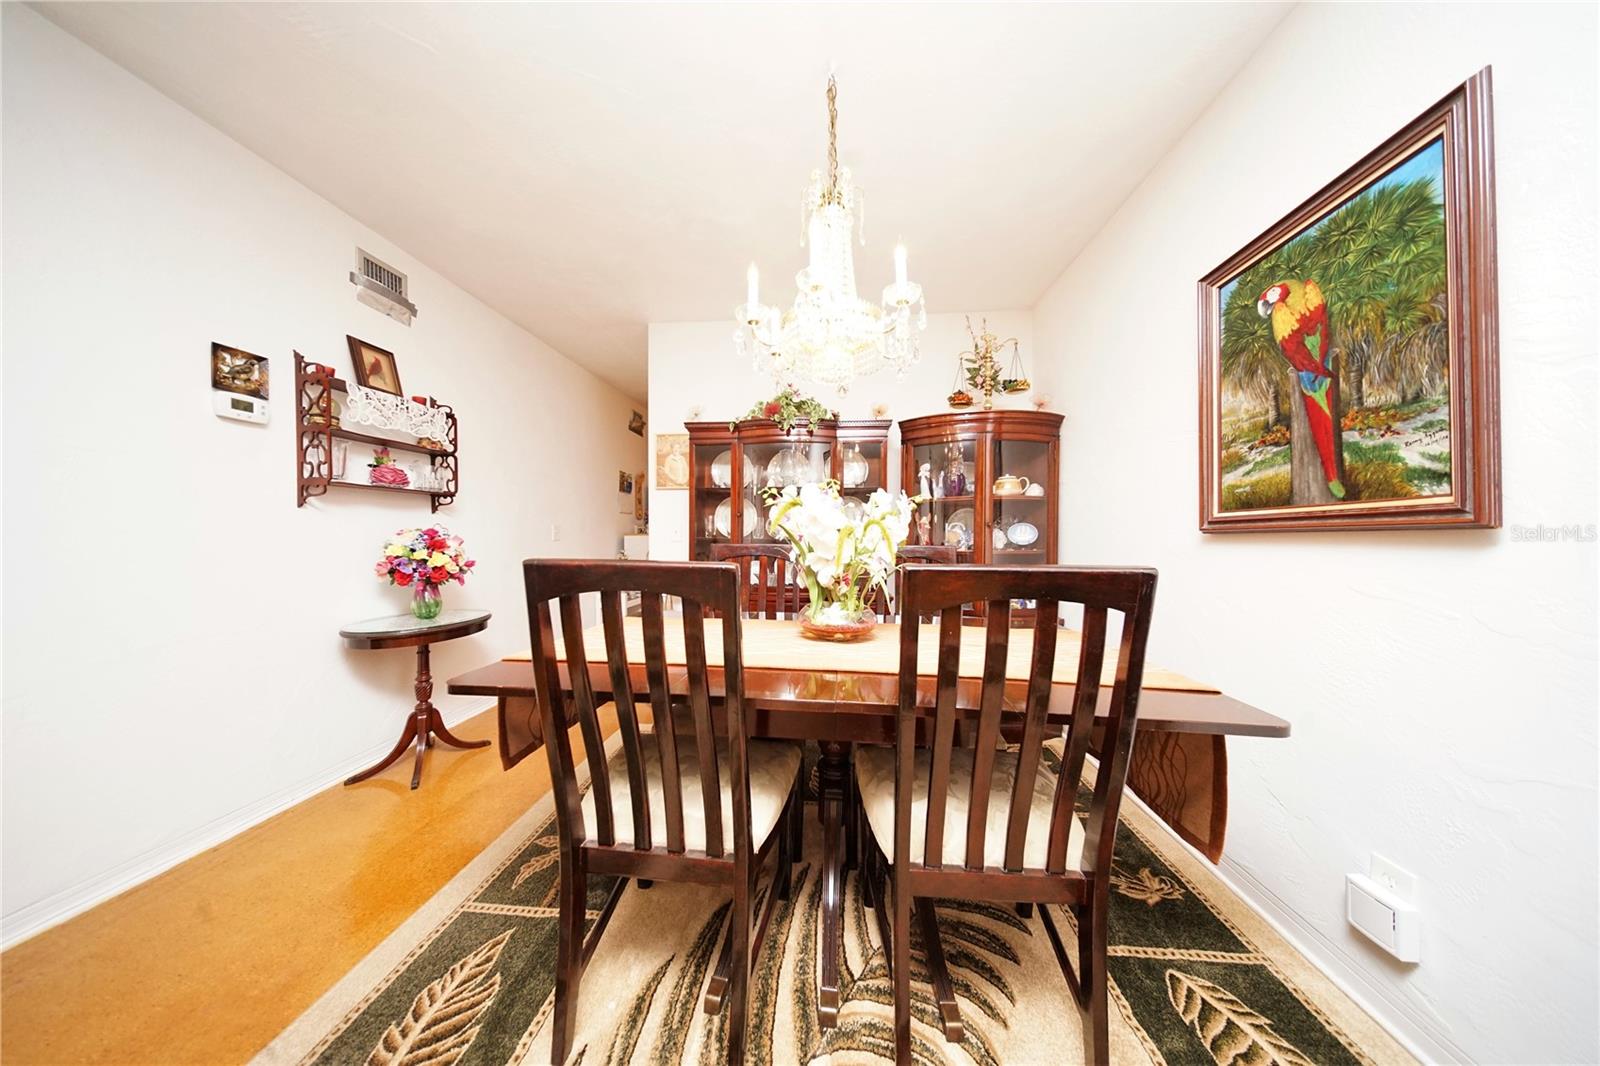 Elegantly furnished dining area with all that can convey.